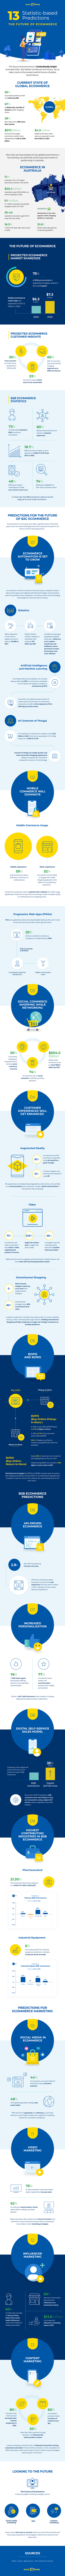 Infographic The Future of eCommerce 13 Statistics-based Predictions